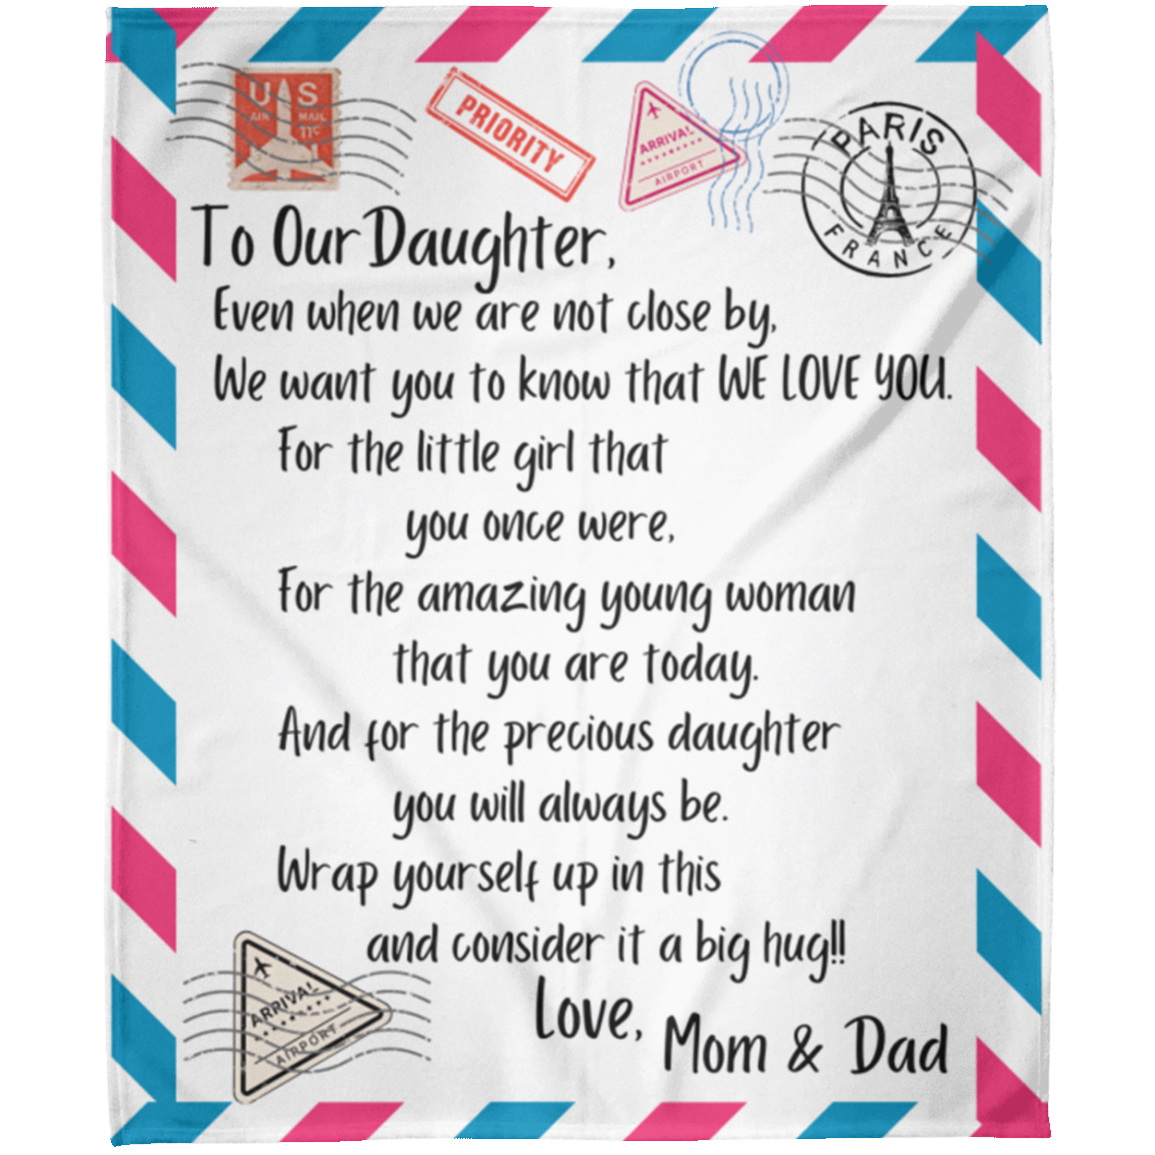 To Our Daughter from Mom & Dad  (2) Fleece Blanket 50x60